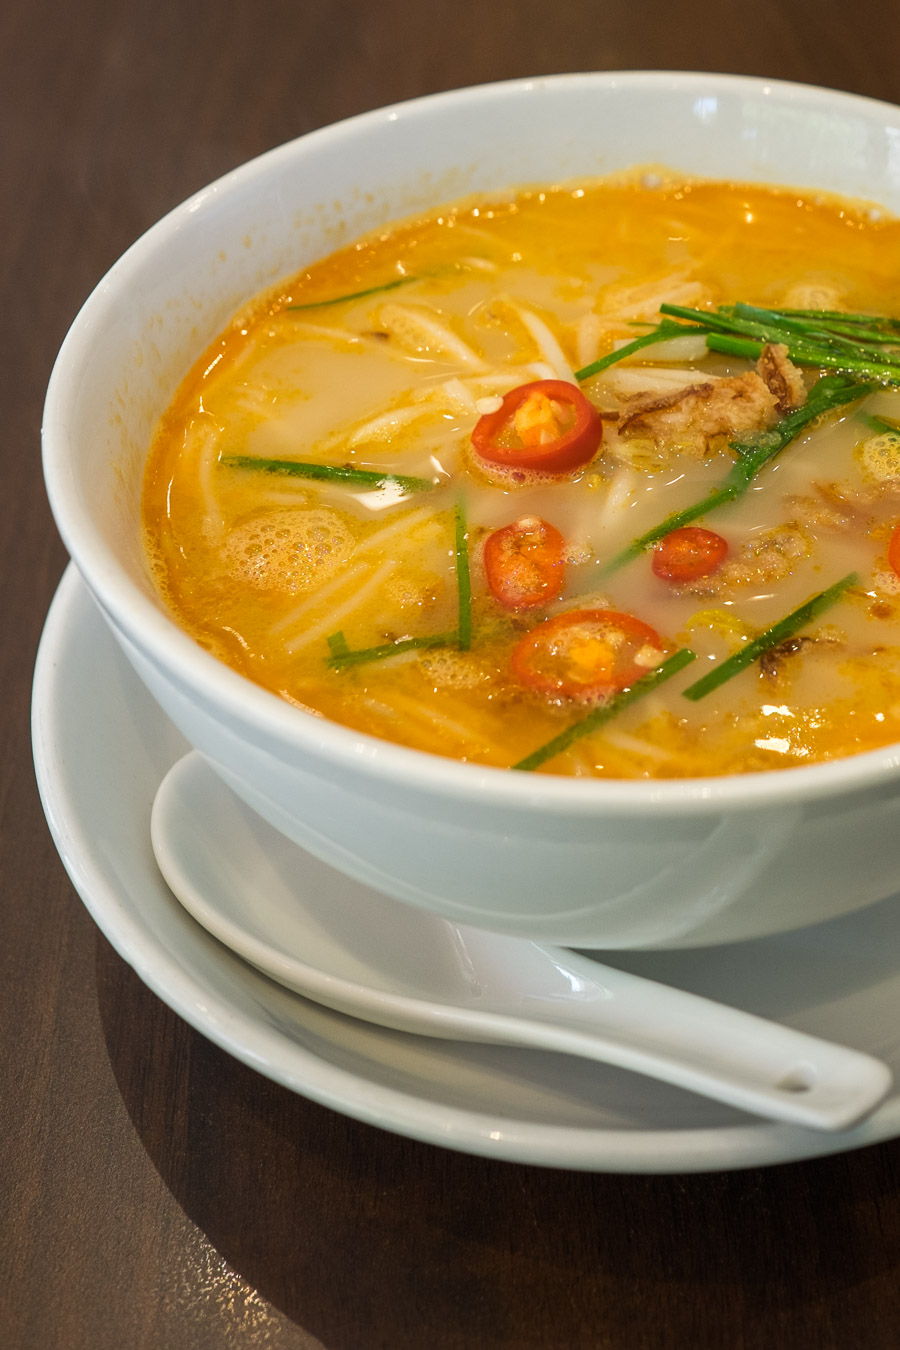 Ipoh kway teow soup - curry broth made with prawn head stock